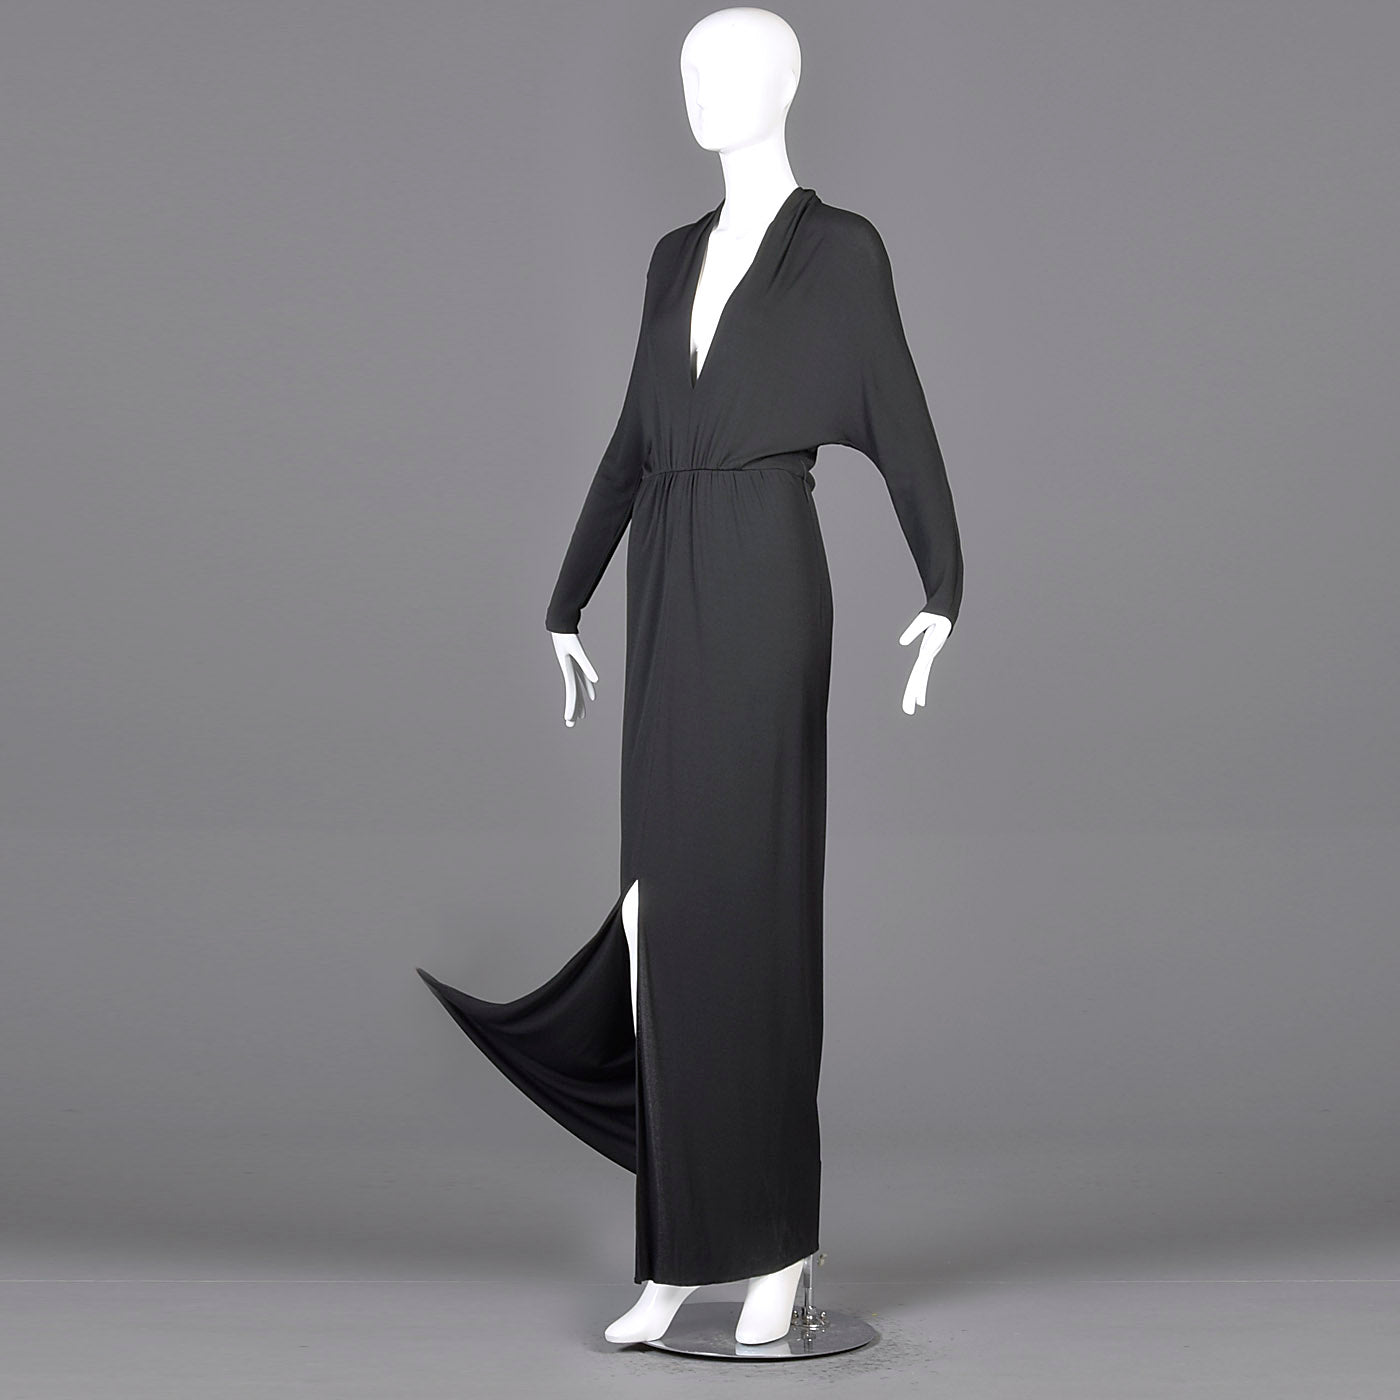 Extraordinary 1970s Bill Tice for Malcolm Starr Black Evening Gown with Plunging Neckline